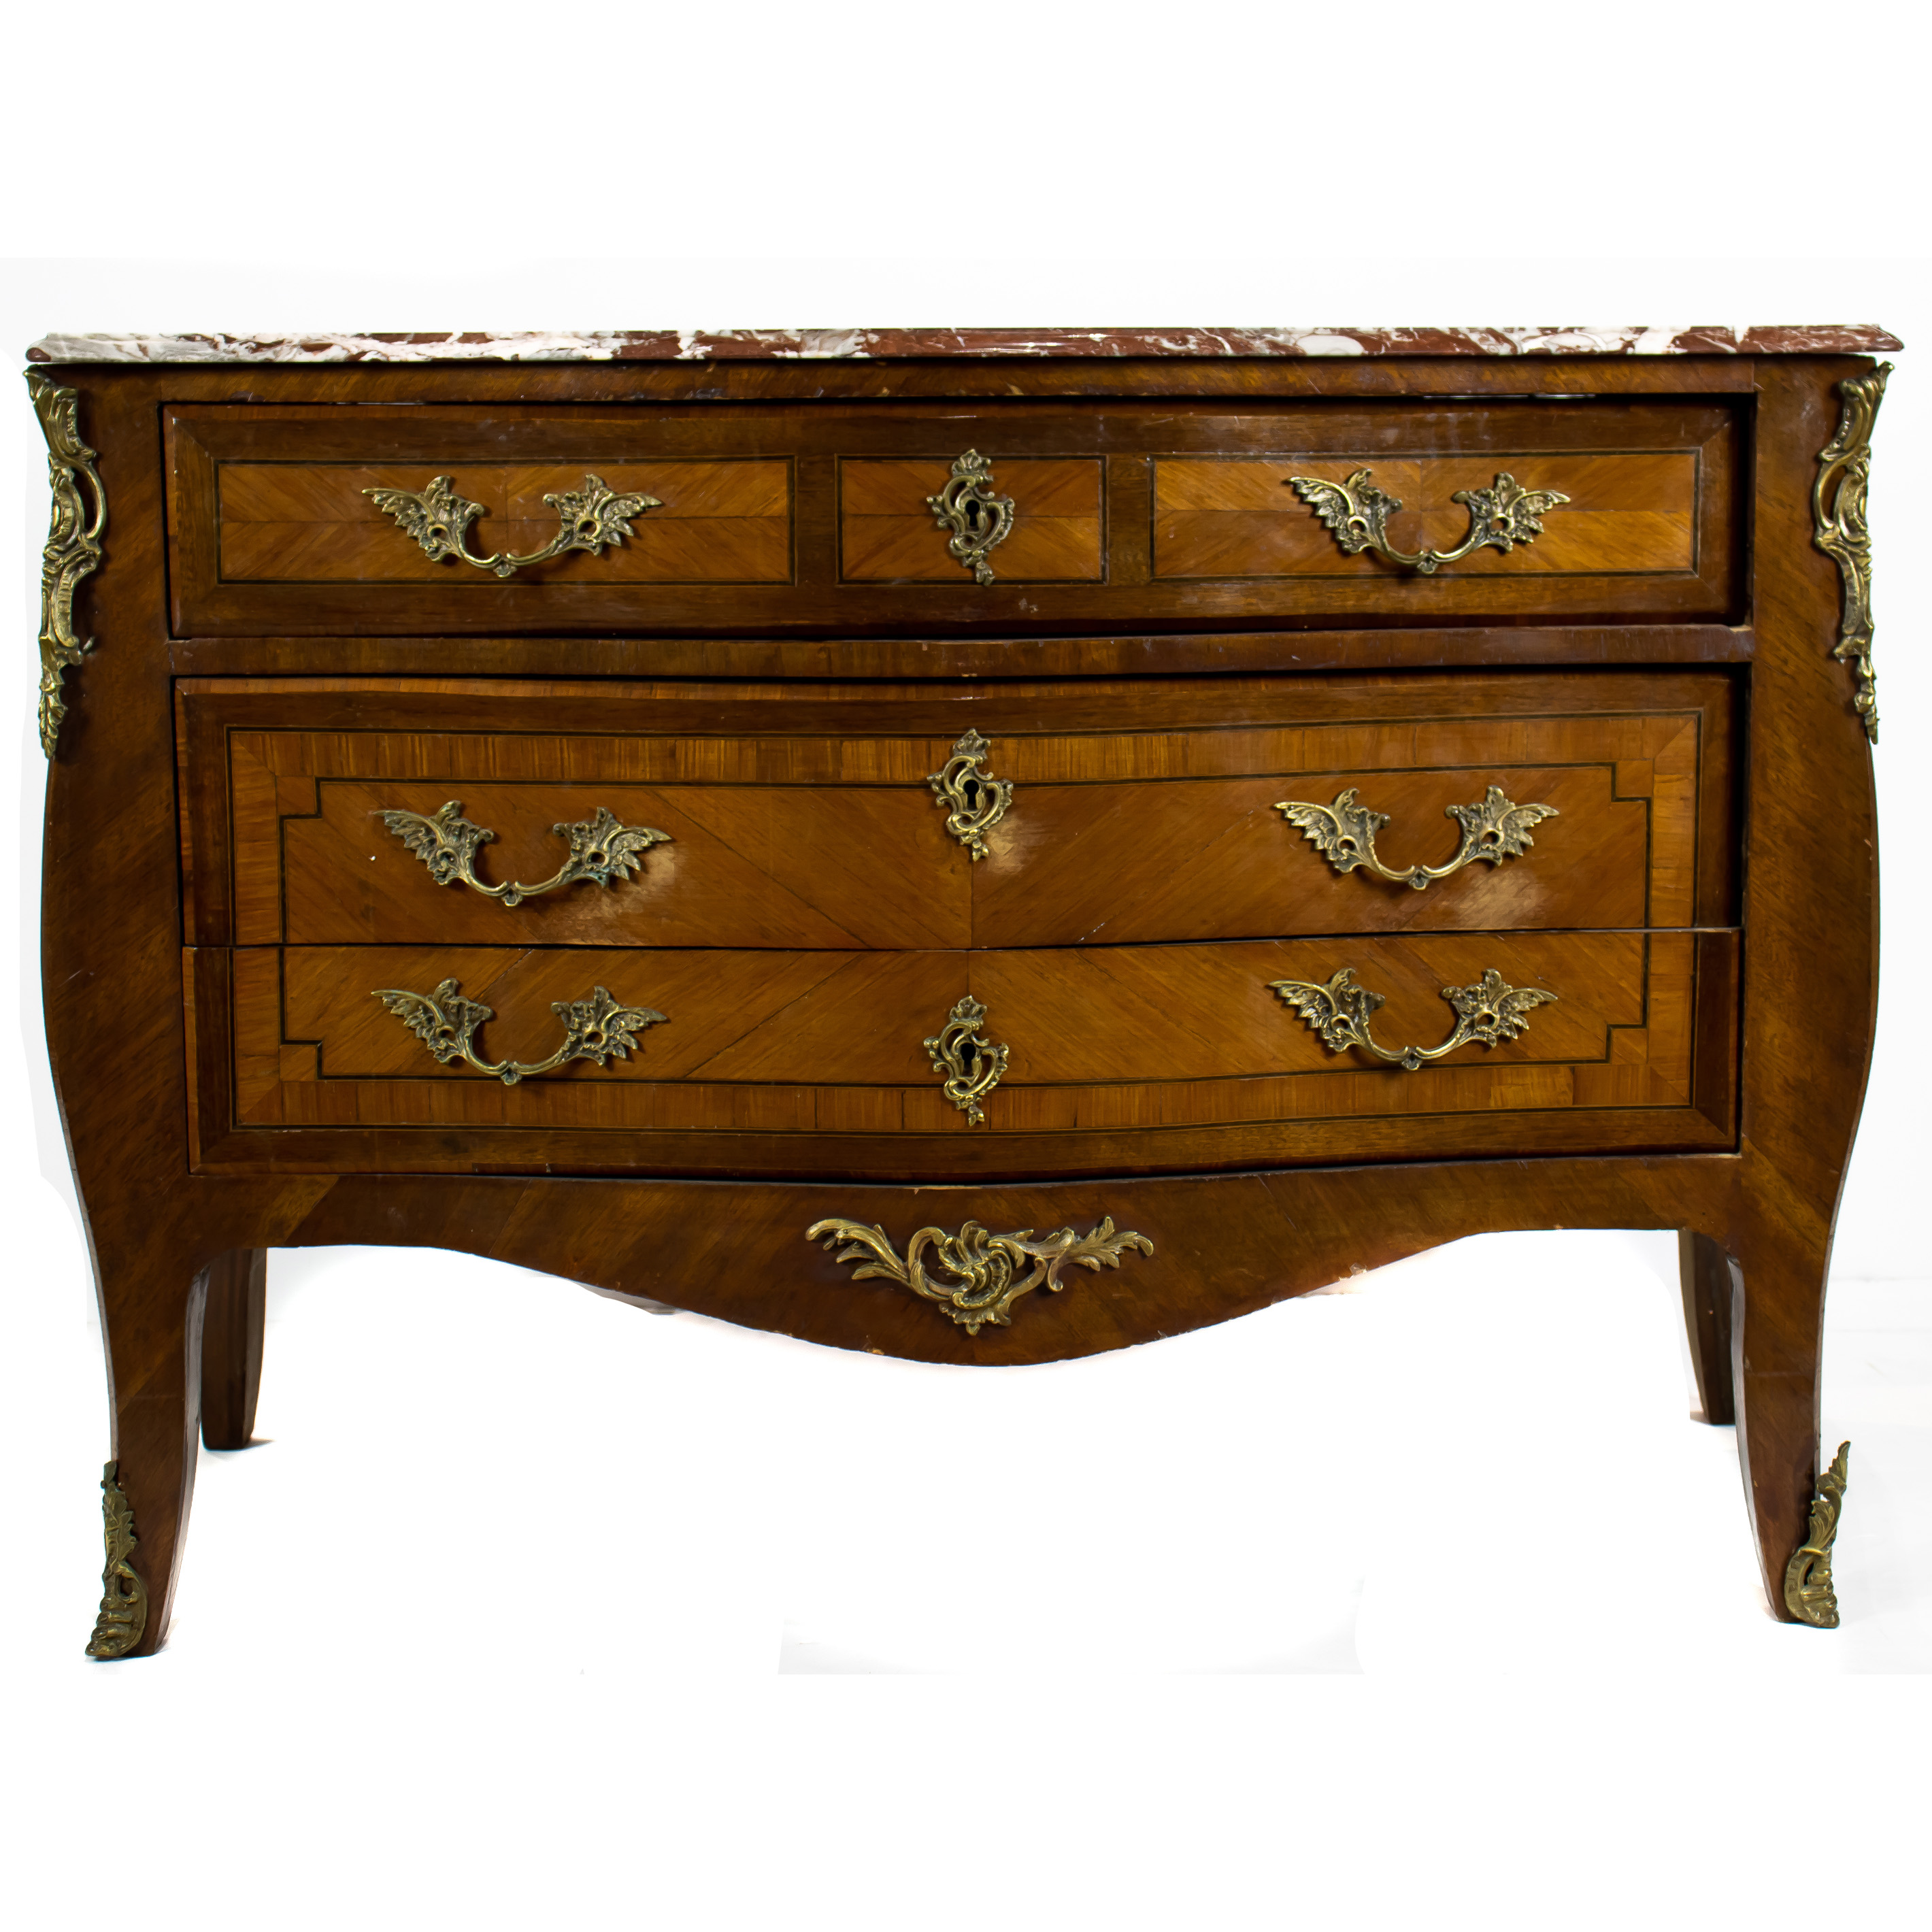 A LOUIS XV STYLE GILT MOUNTED COMMODE 3a3d64